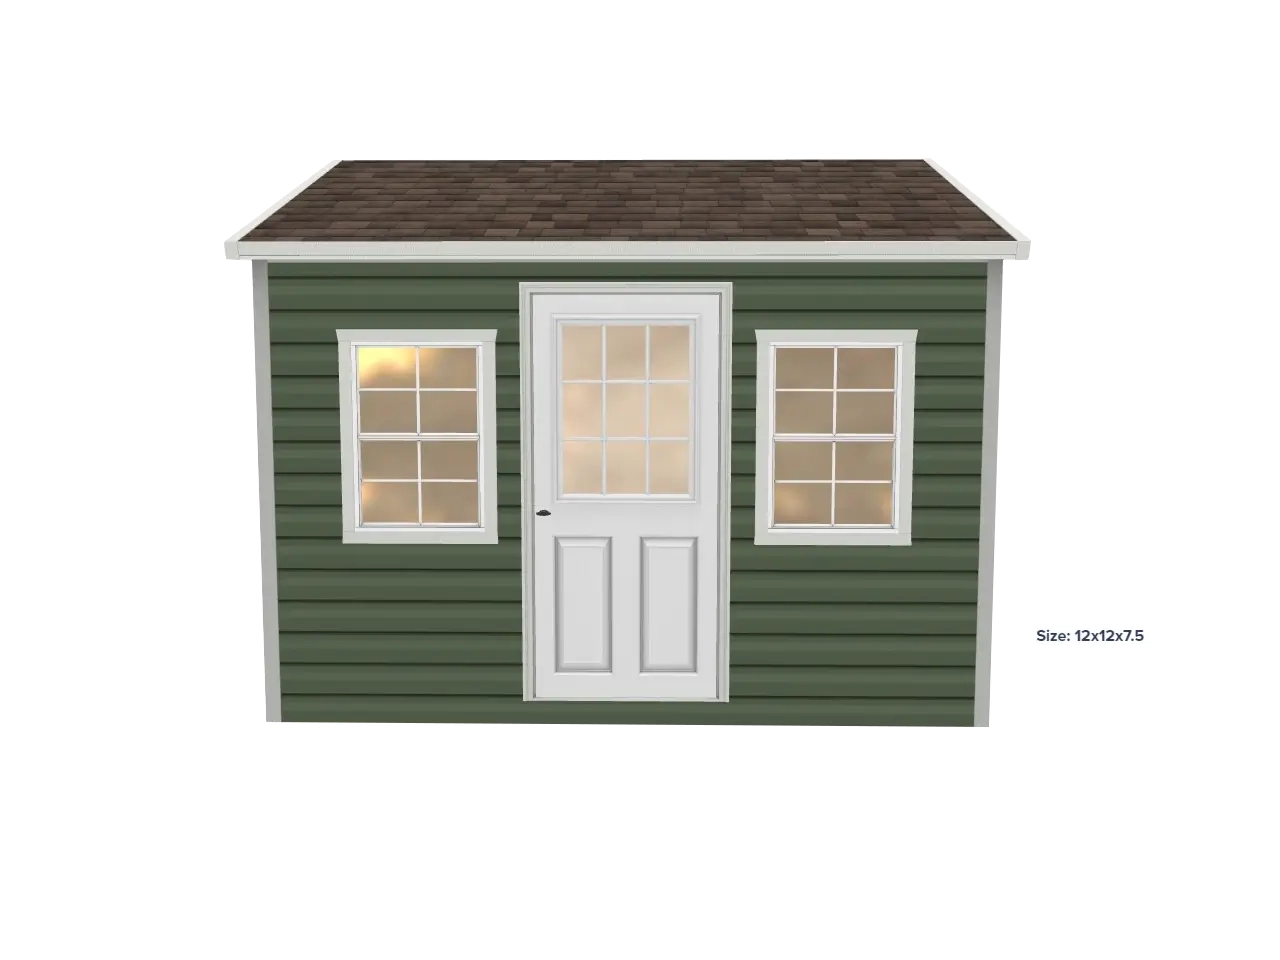 Cute garden shed with architectural shingled roof, nine light door and two windows.